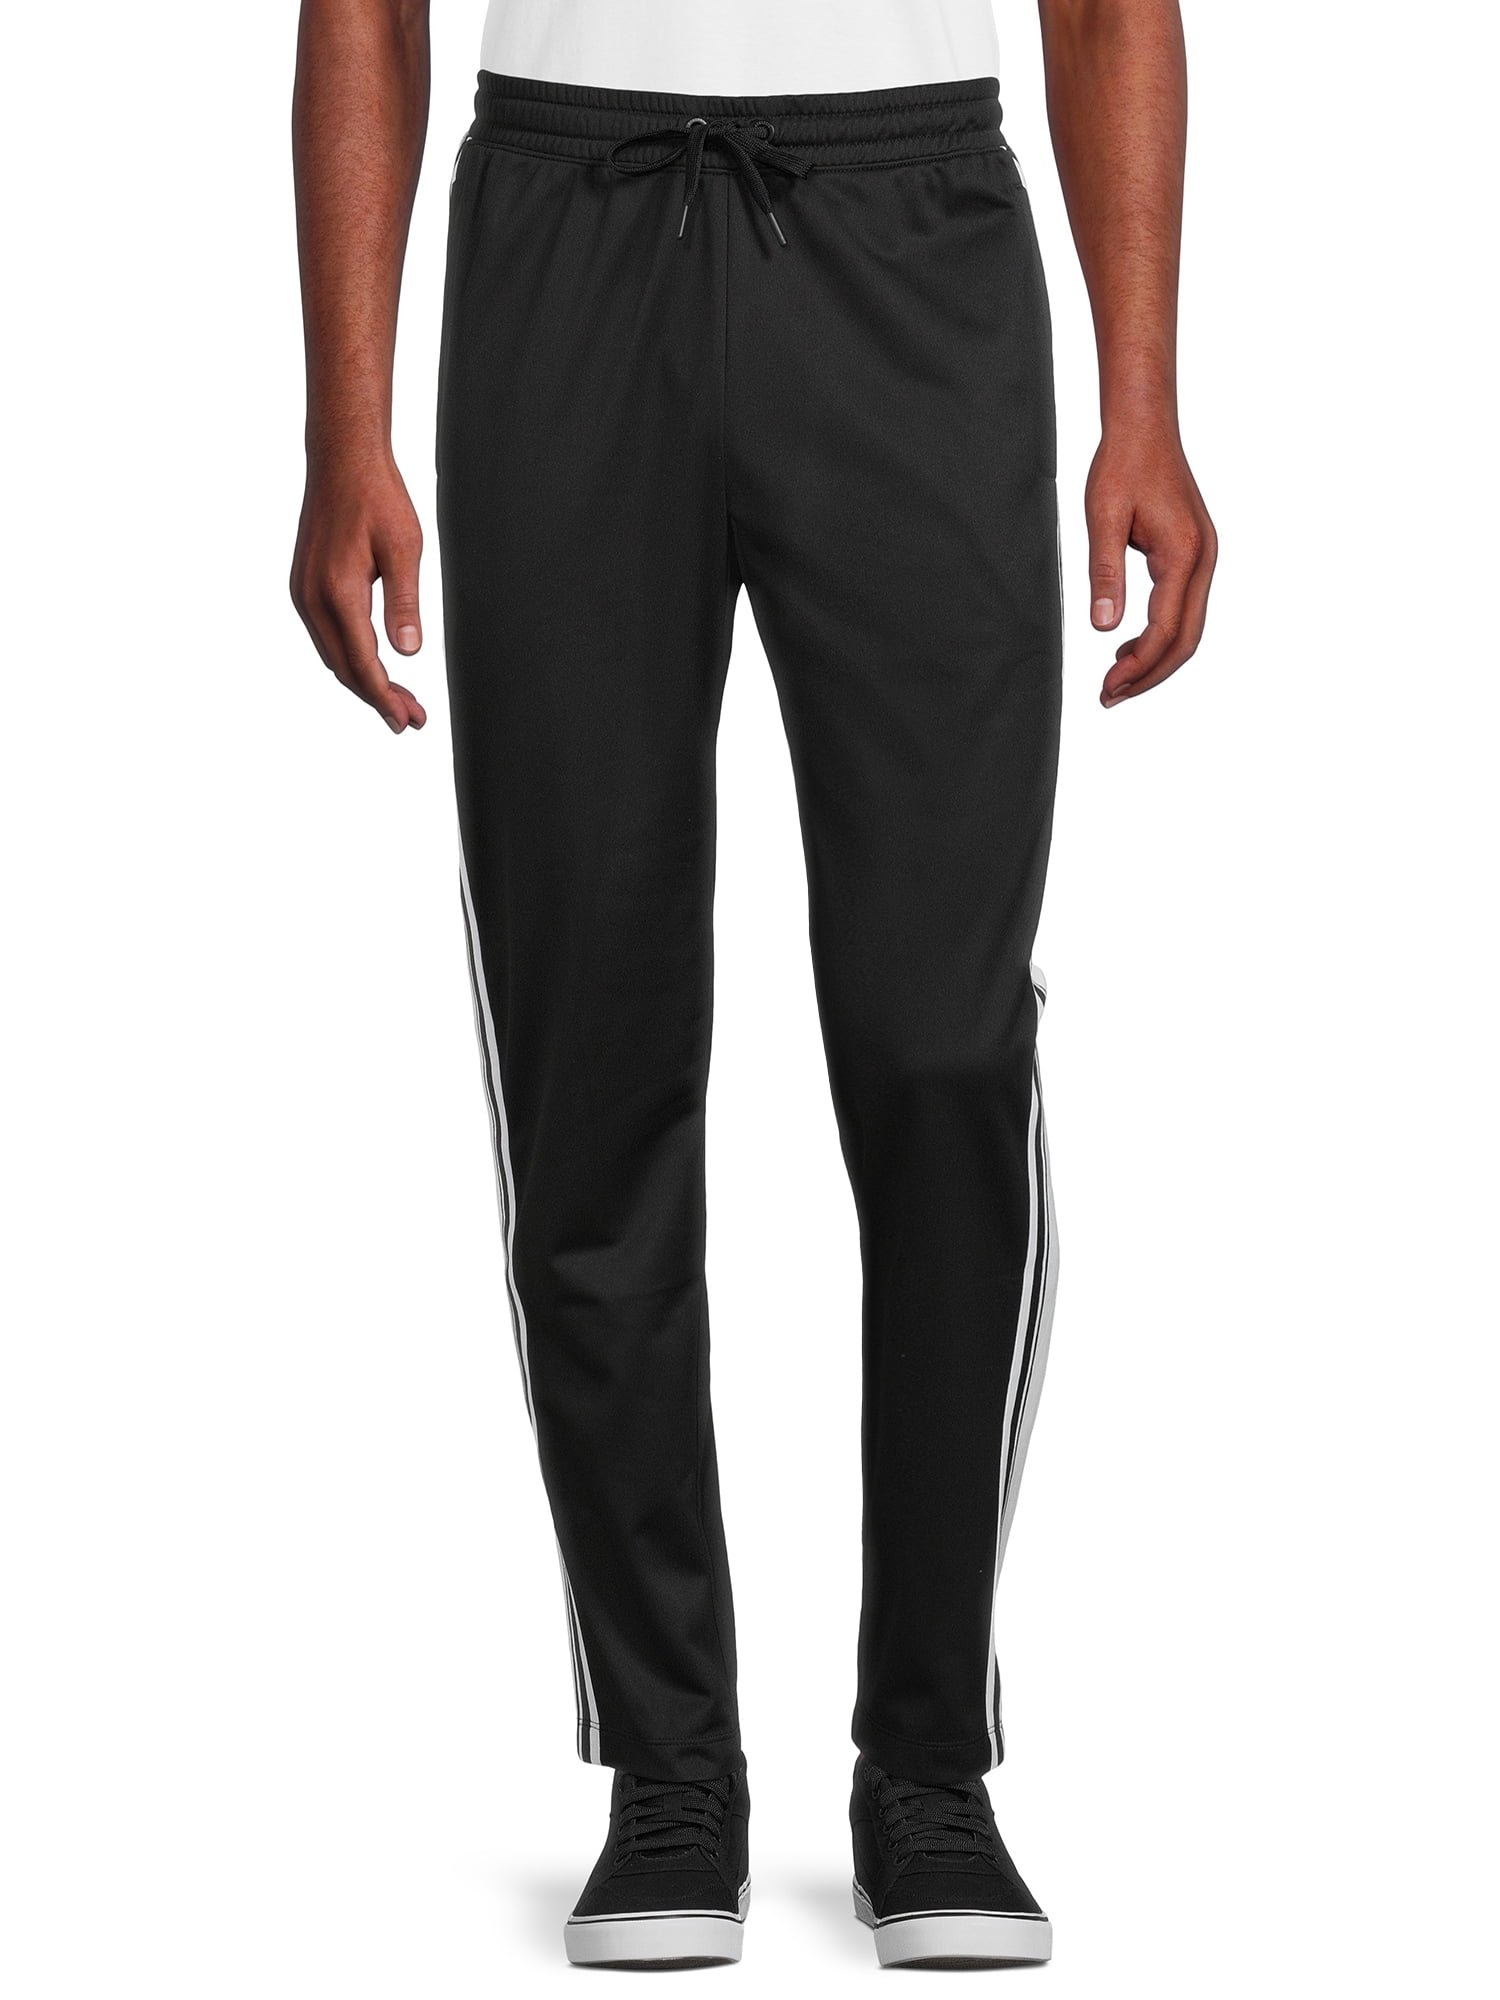 Athletic Works Men’s and Big Men's Track Pants, Sizes S-3XL